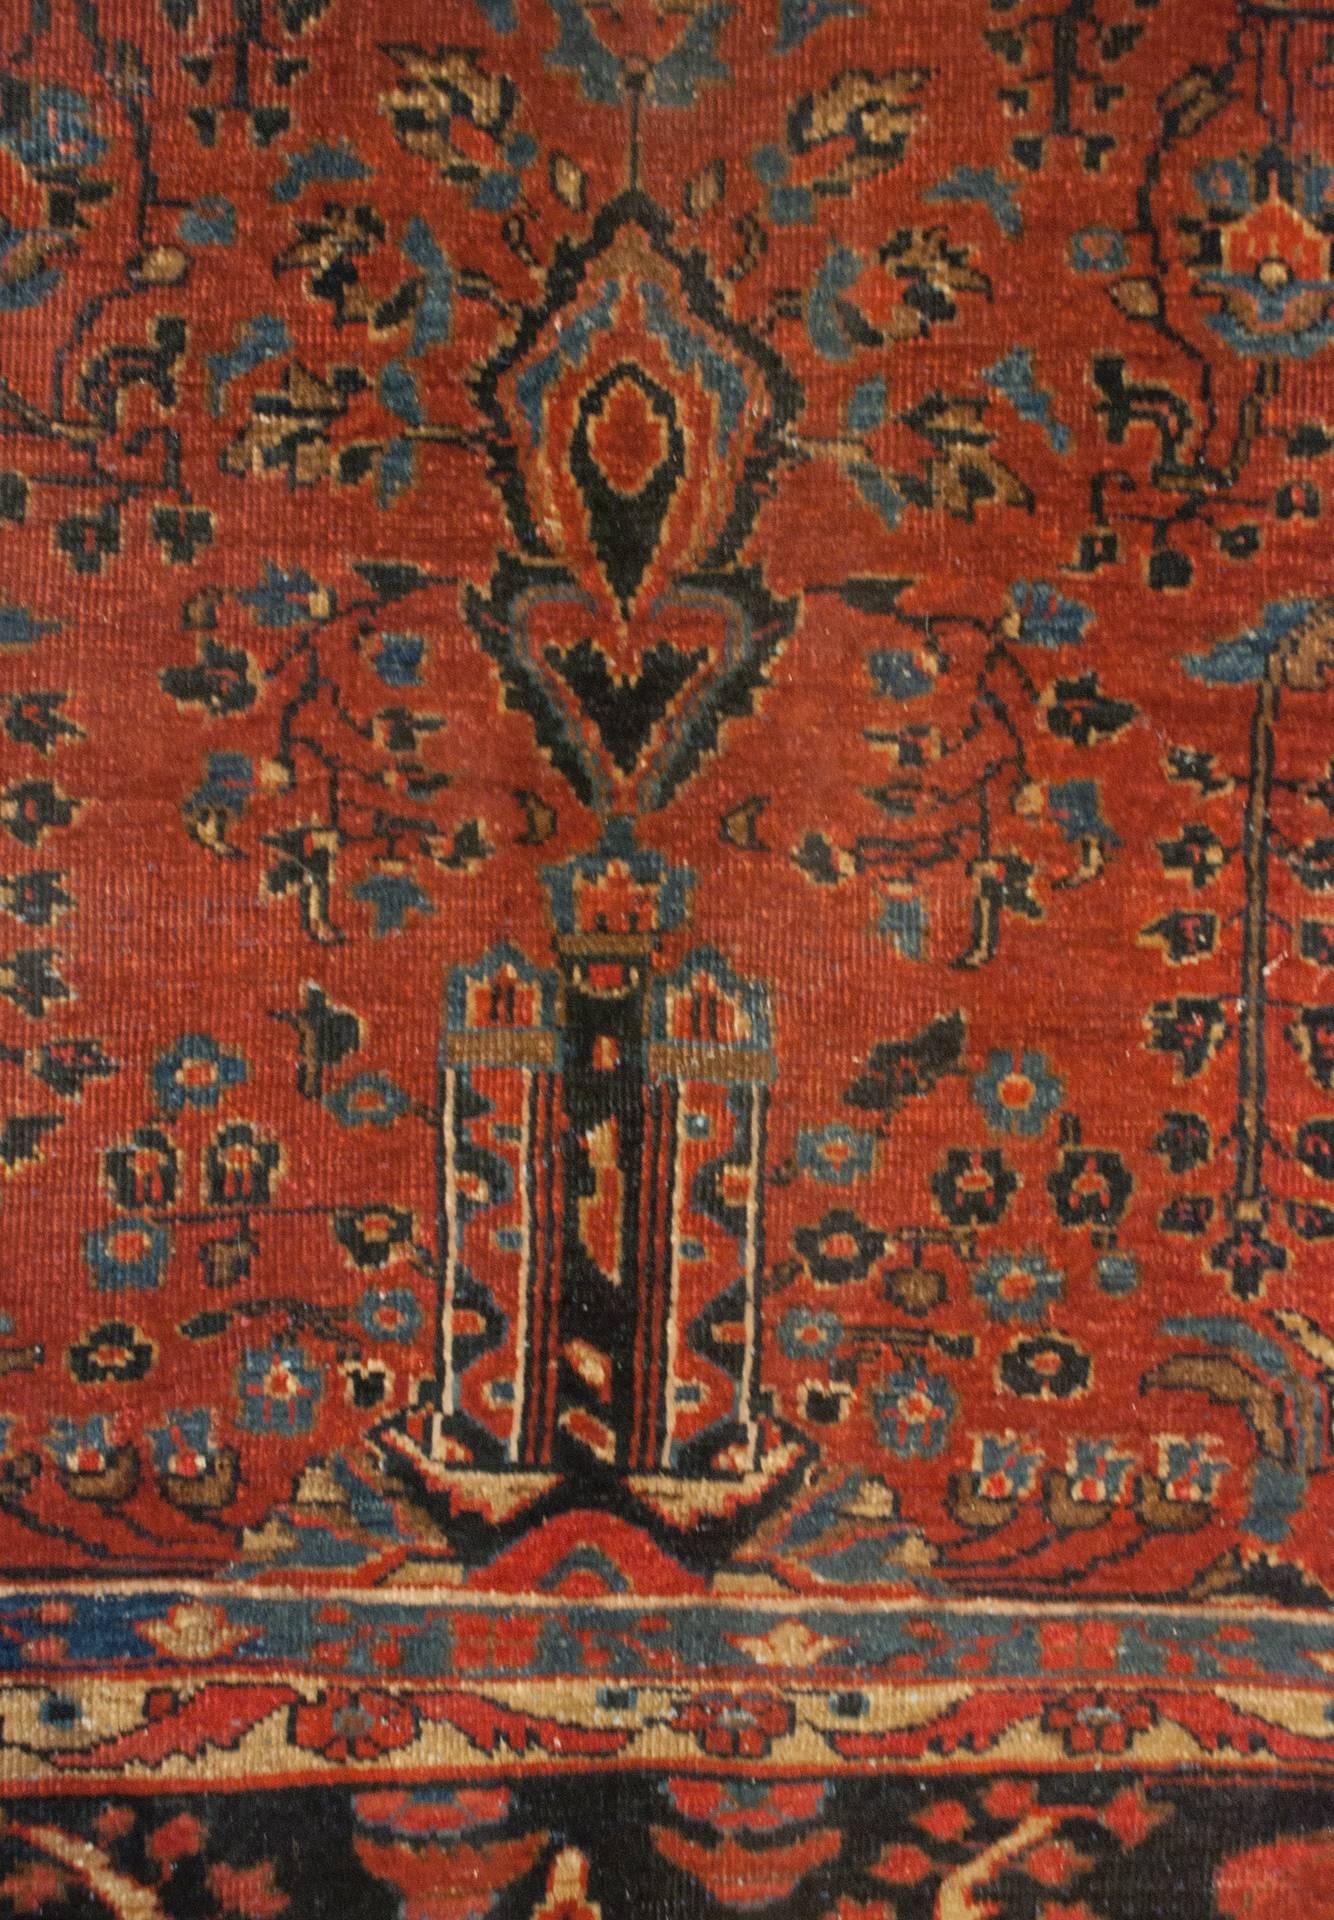 An early 20th century Persian Tabriz rug with a unique all-over multi-colored tree-of-life pattern with flowers, vines, and trees woven in dark and light indigo, and natural un-dyed wool, on a wonderful crimson background. The wide border is